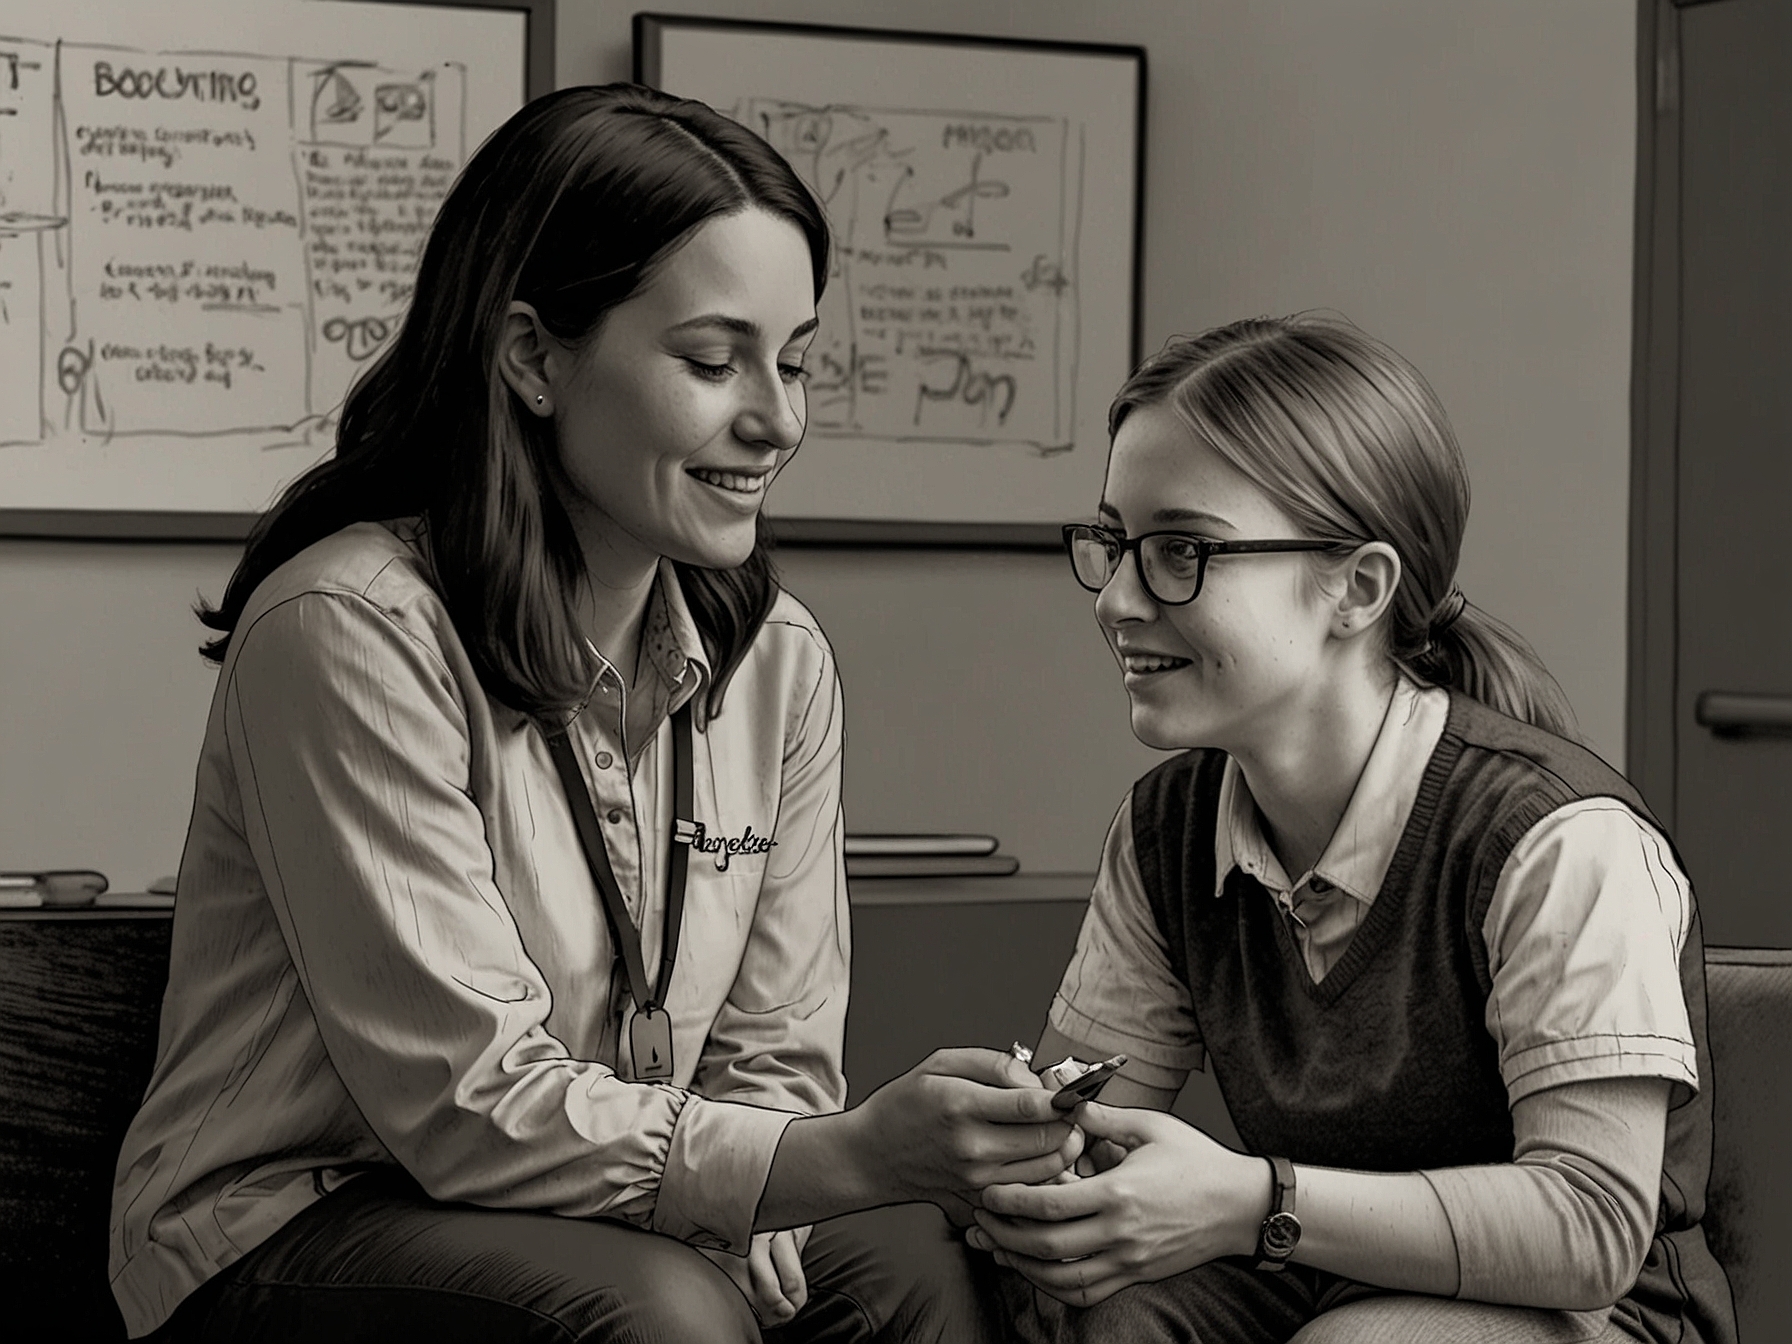 A school counselor provides emotional support to a student, highlighting the increased mental health services implemented using federal COVID aid funds.